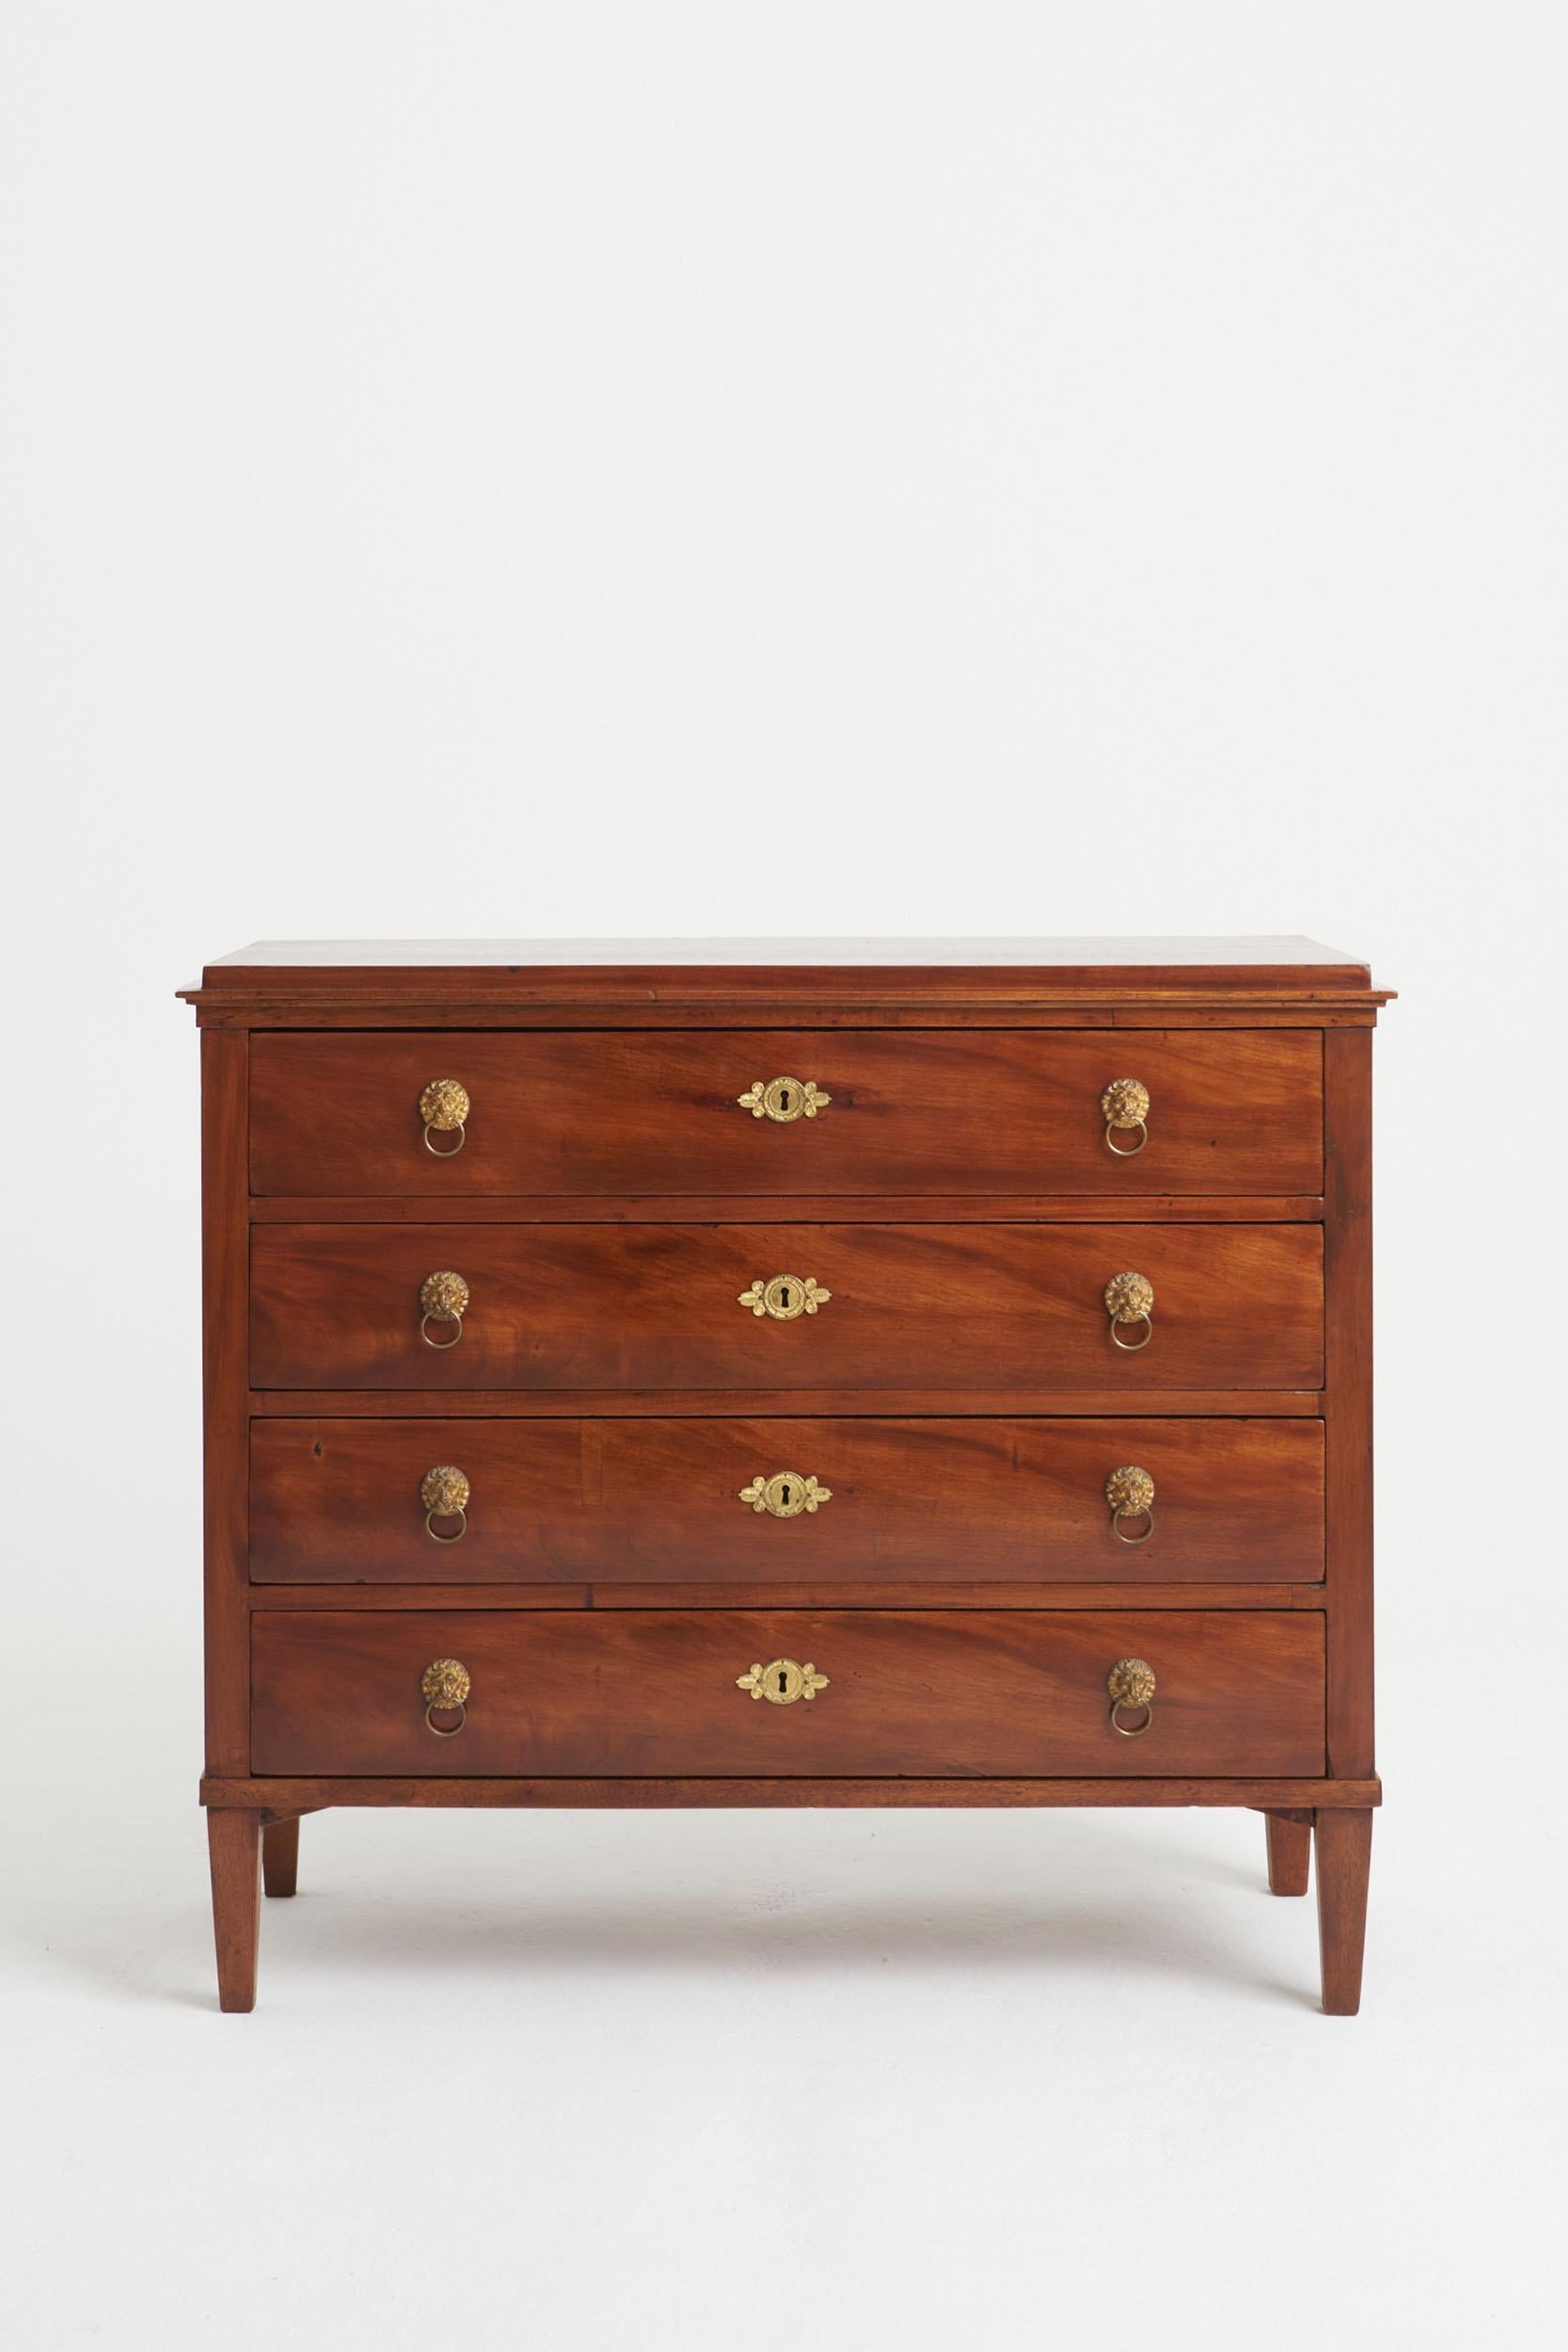 A Mahogany and gilt bronze mounts chest of drawers, the top drawer revealing a secretaire.
Sweden, early 19th Century
93 cm high by 107.5 cm wide by 48 cm depth